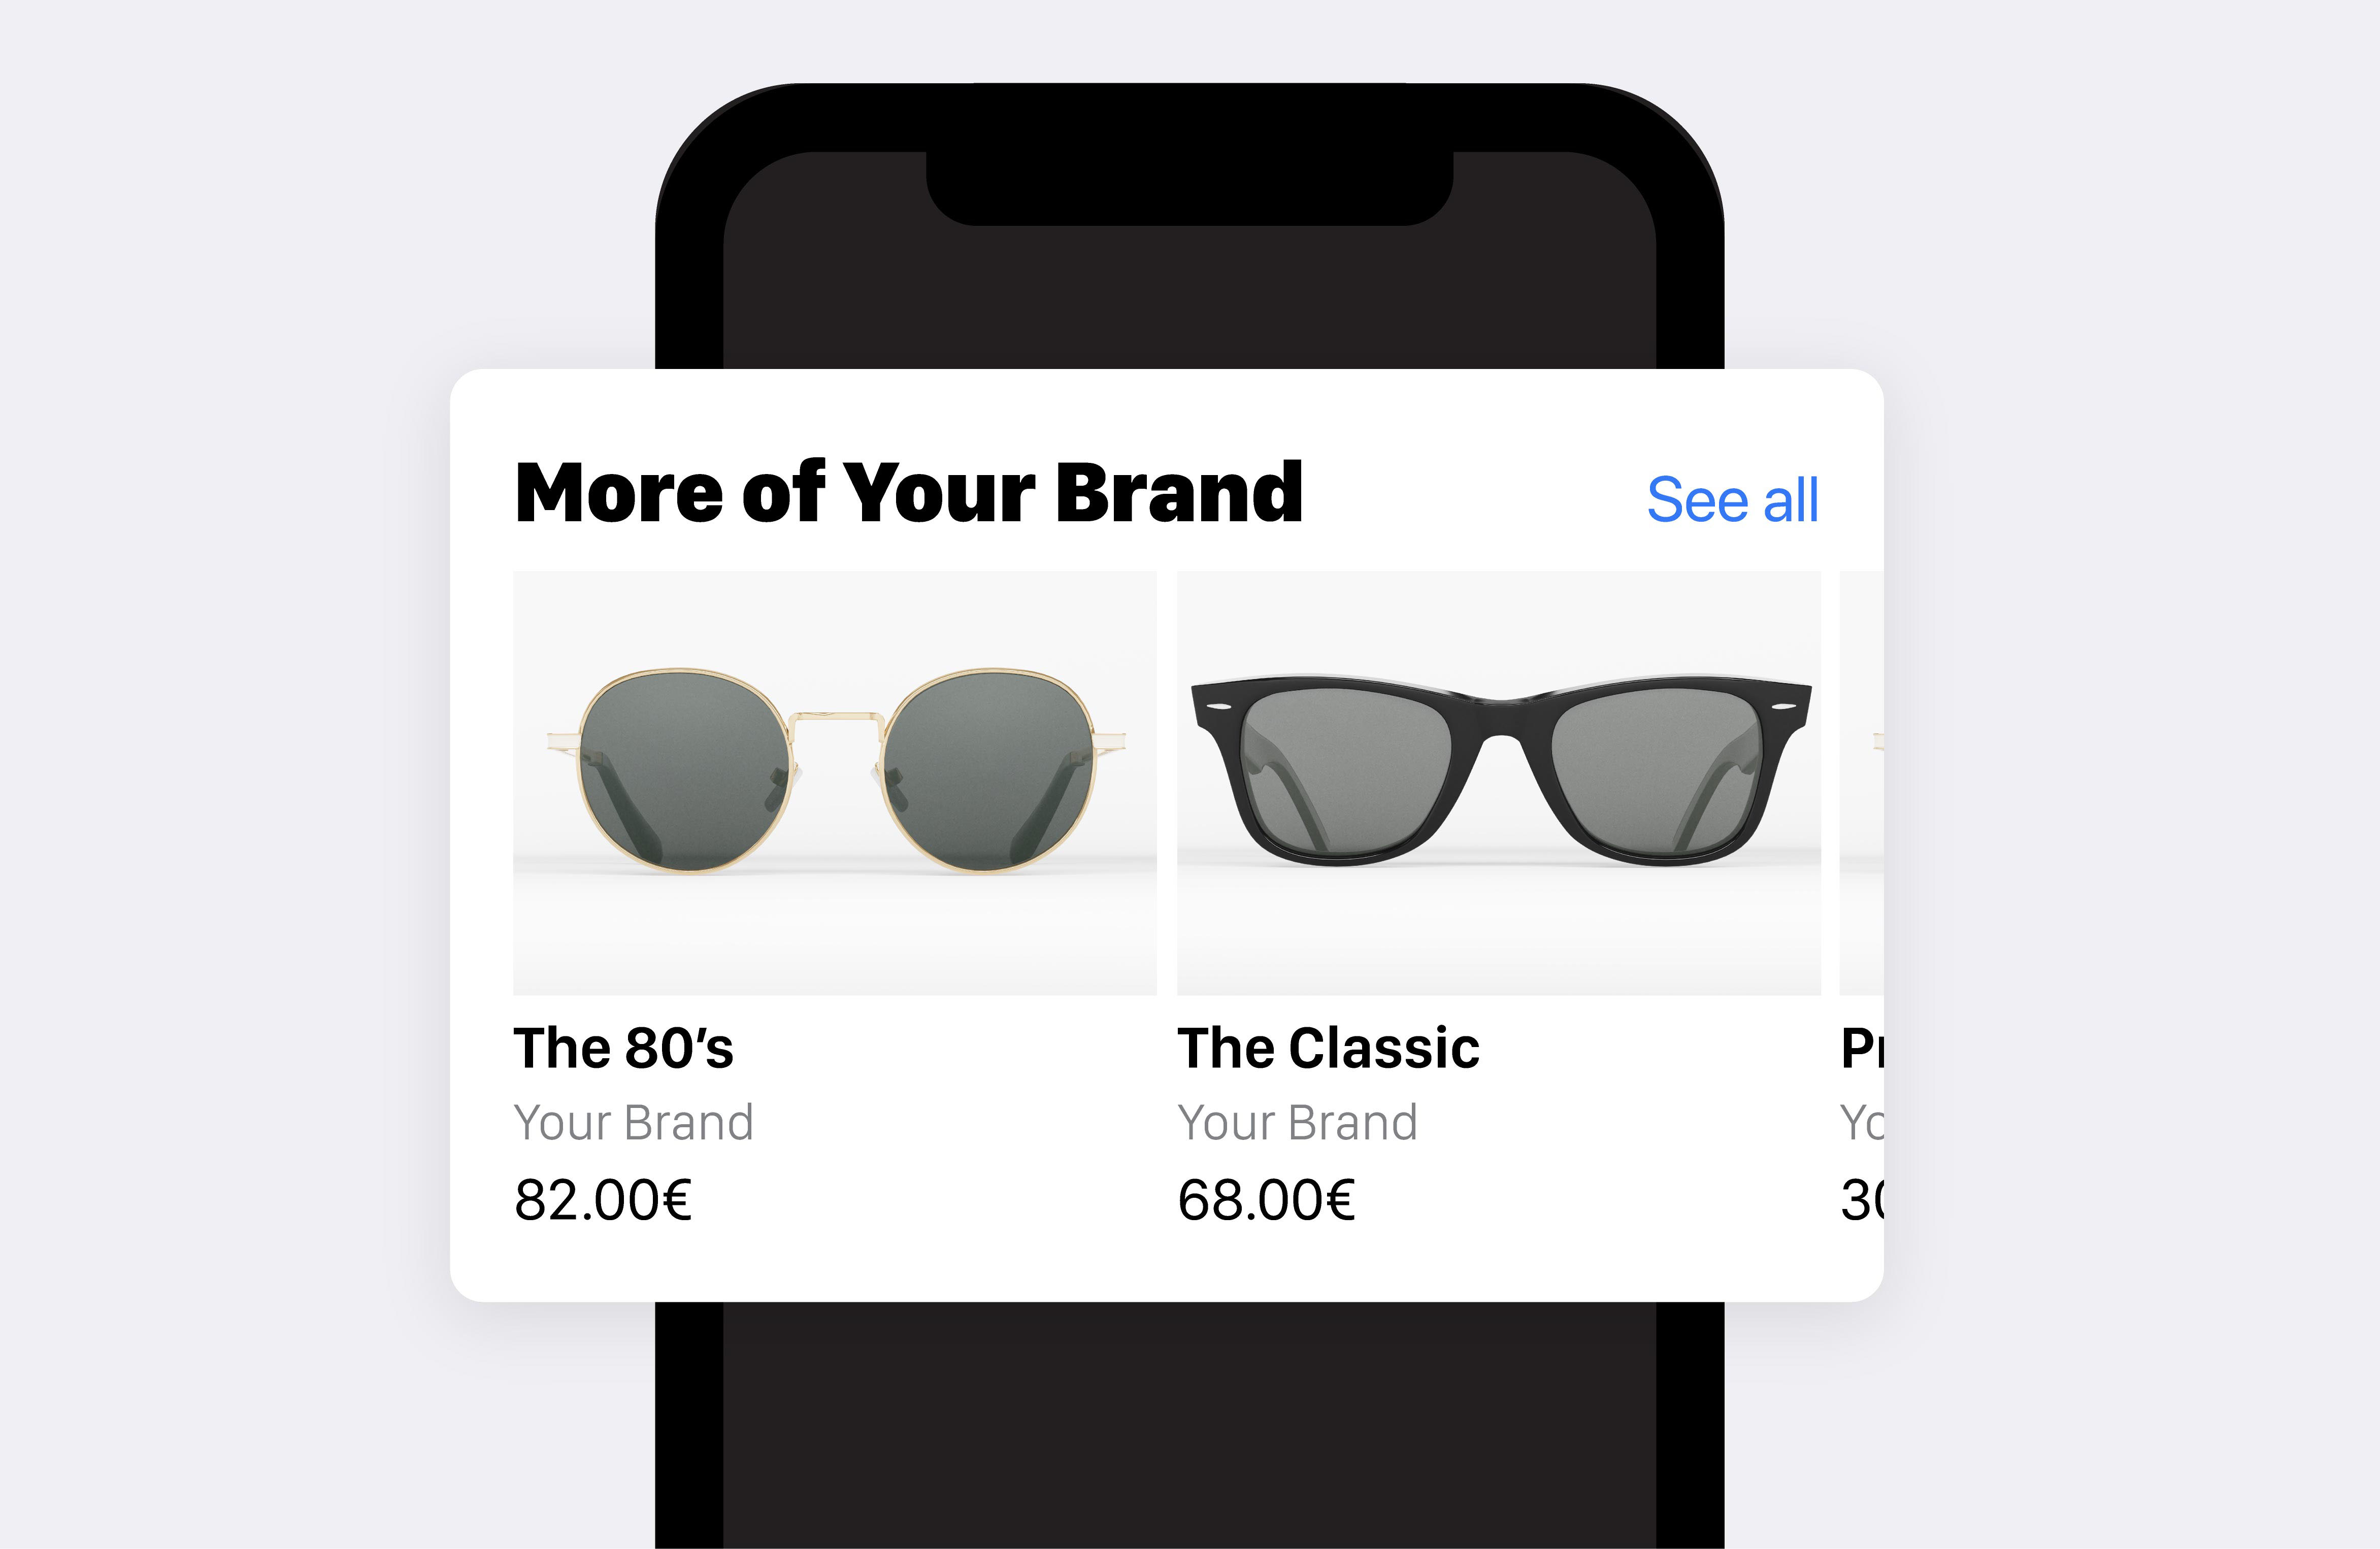 Only recommendations of your brand on the app